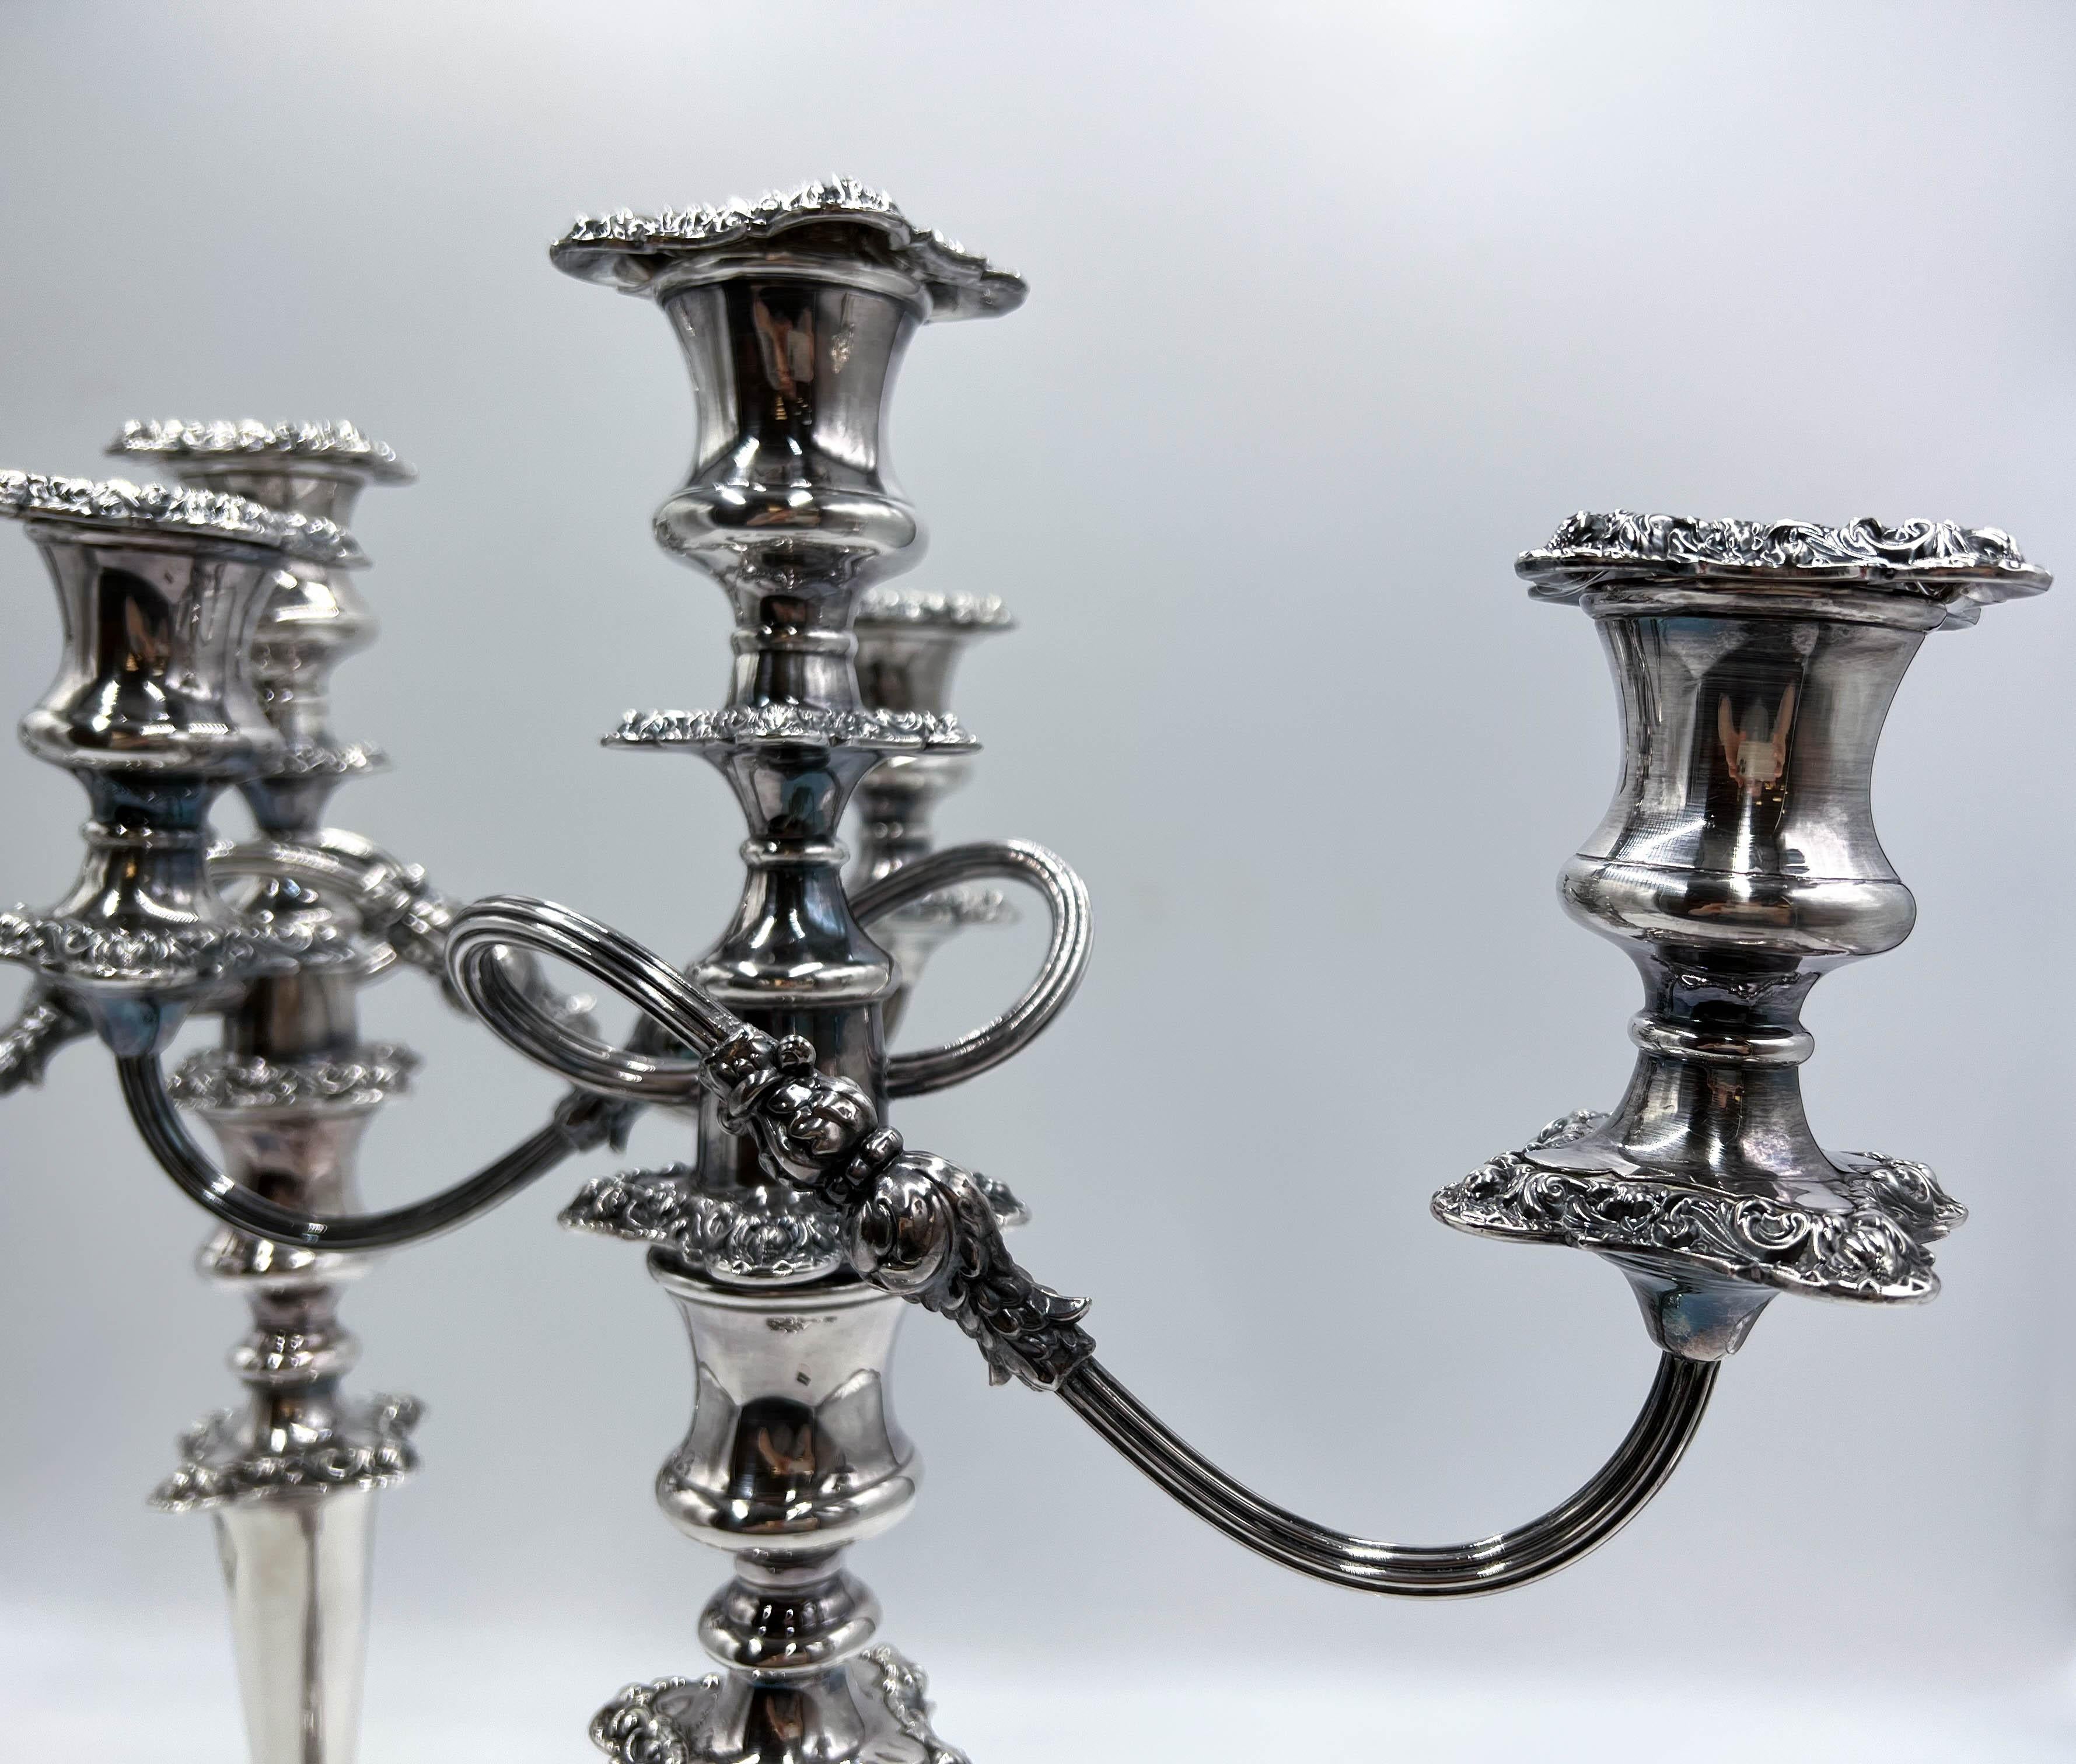 Pair of 1920s William Suckling Ltd English Silver Plate Candelabras/Candlesticks In Good Condition For Sale In Palm Beach Gardens, FL